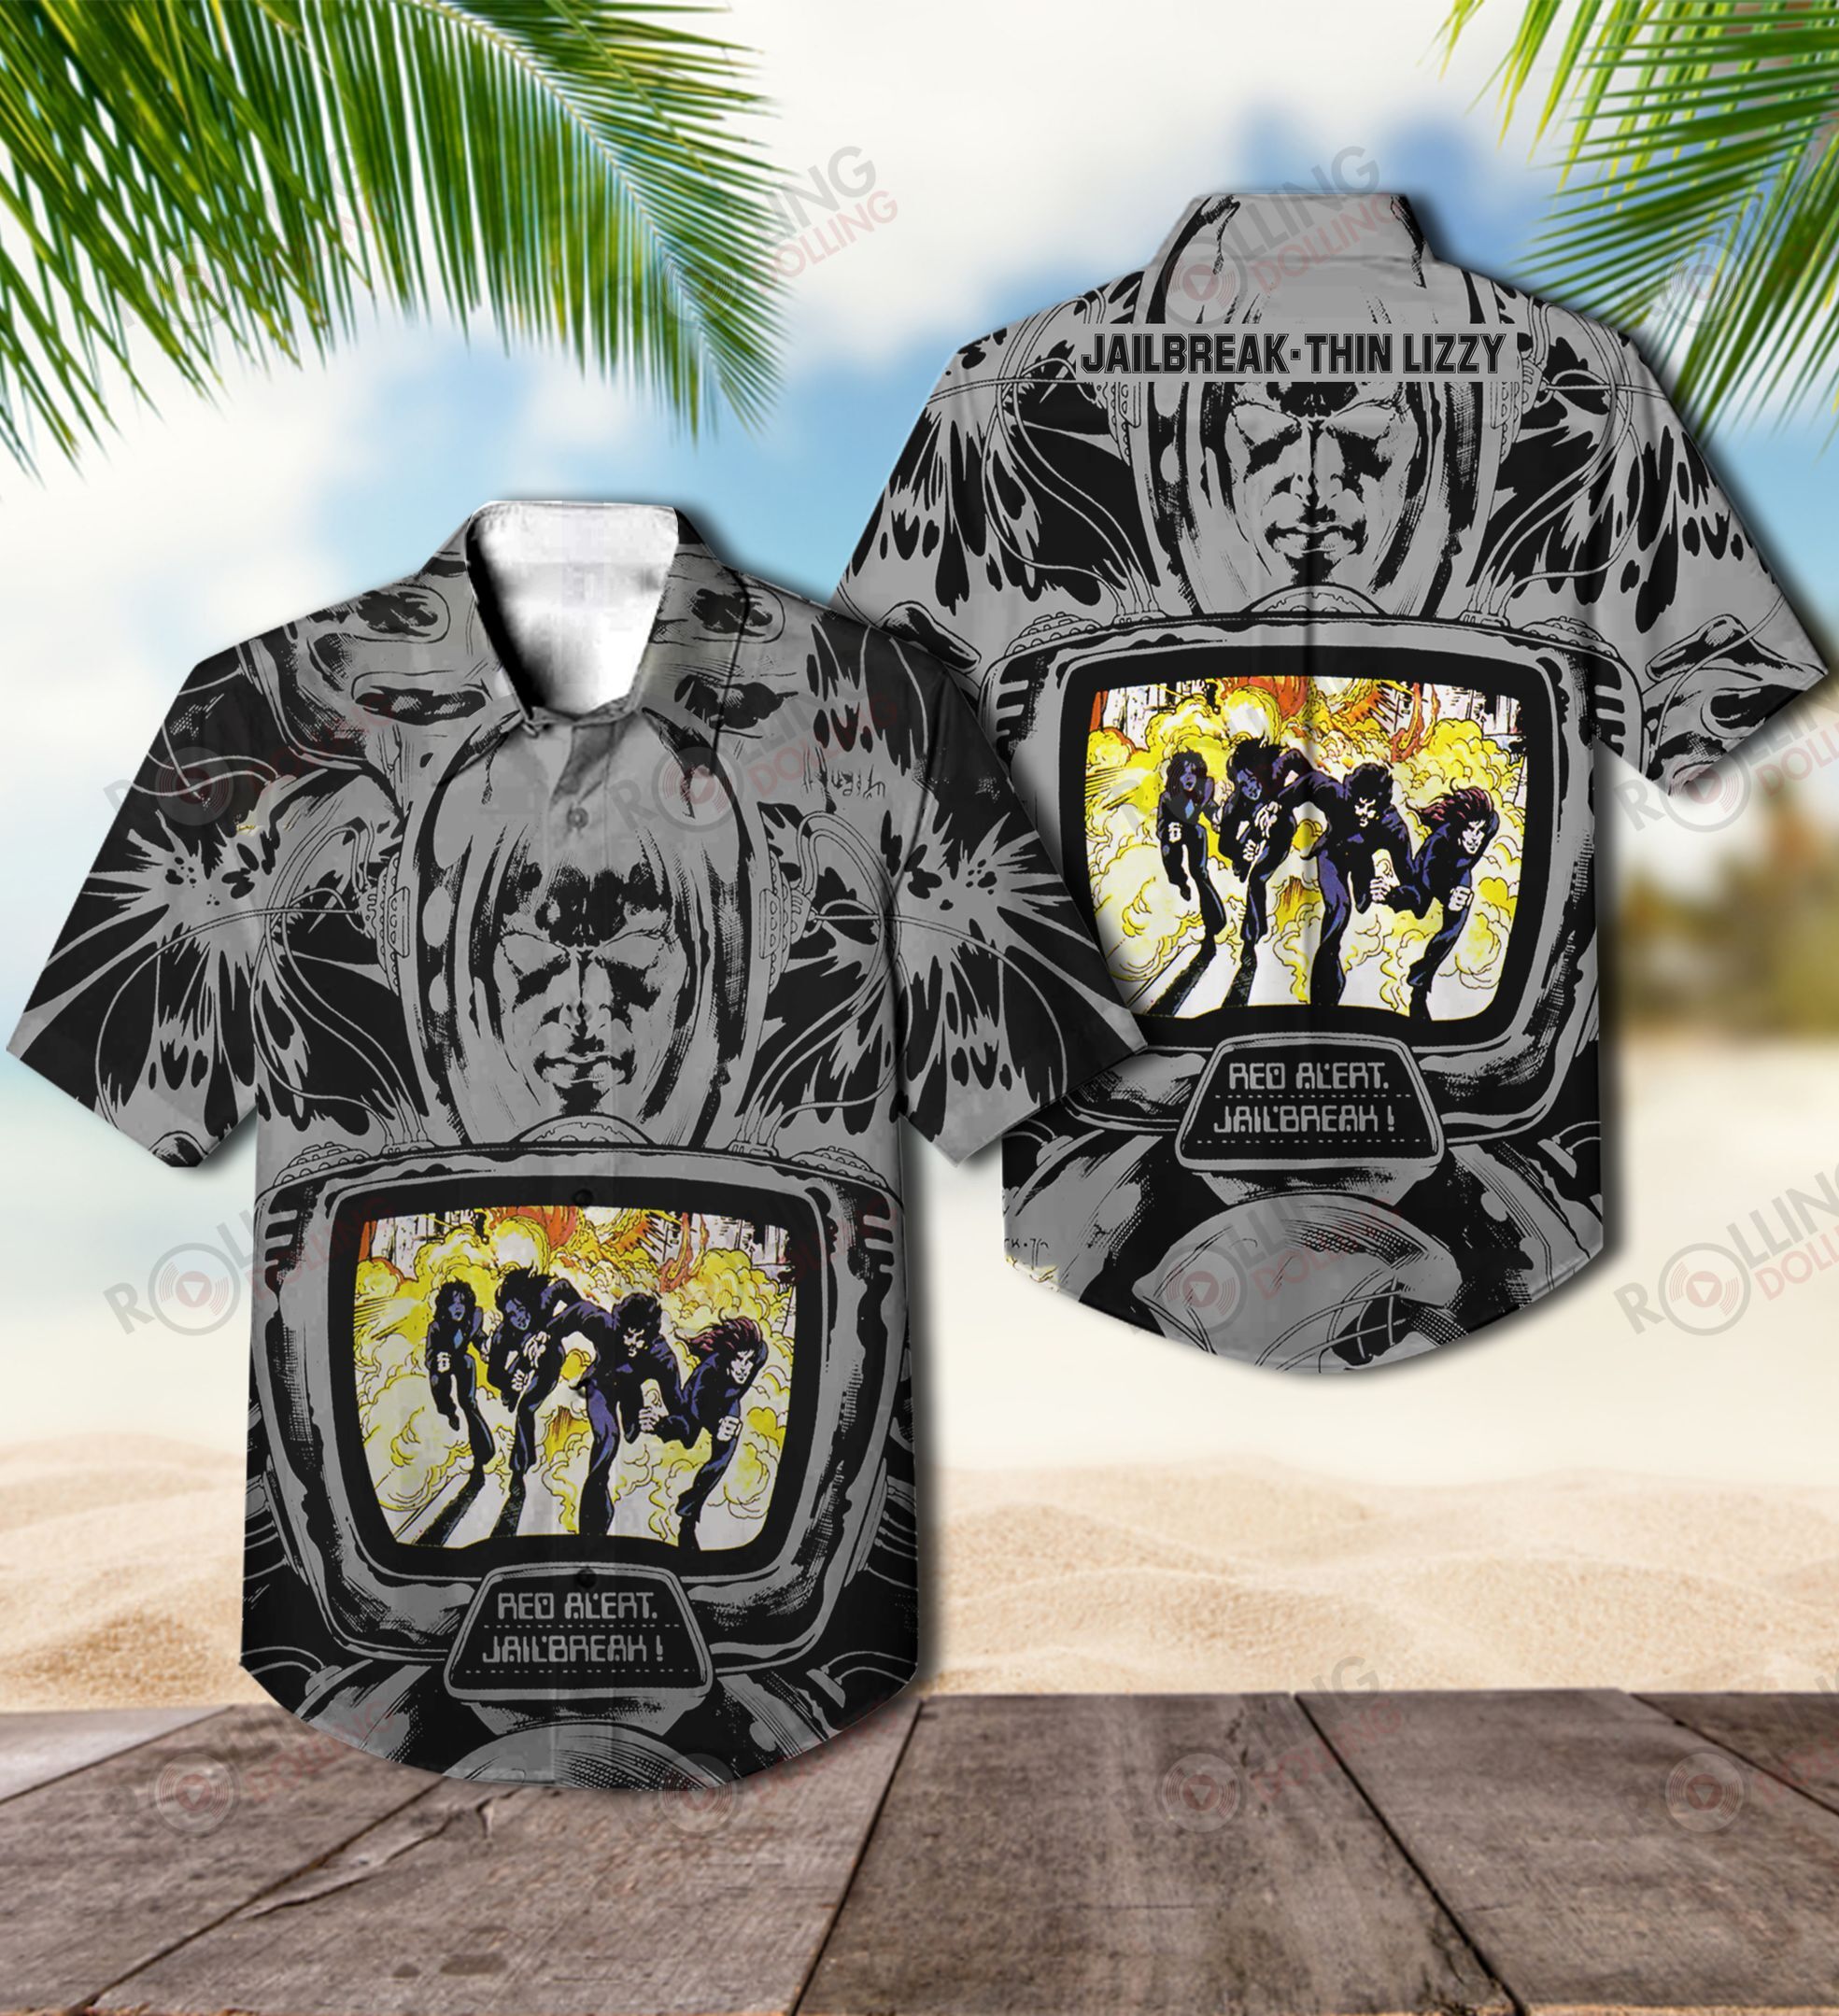 For summer, consider wearing This Amazing Hawaiian Shirt shirt in our store 77